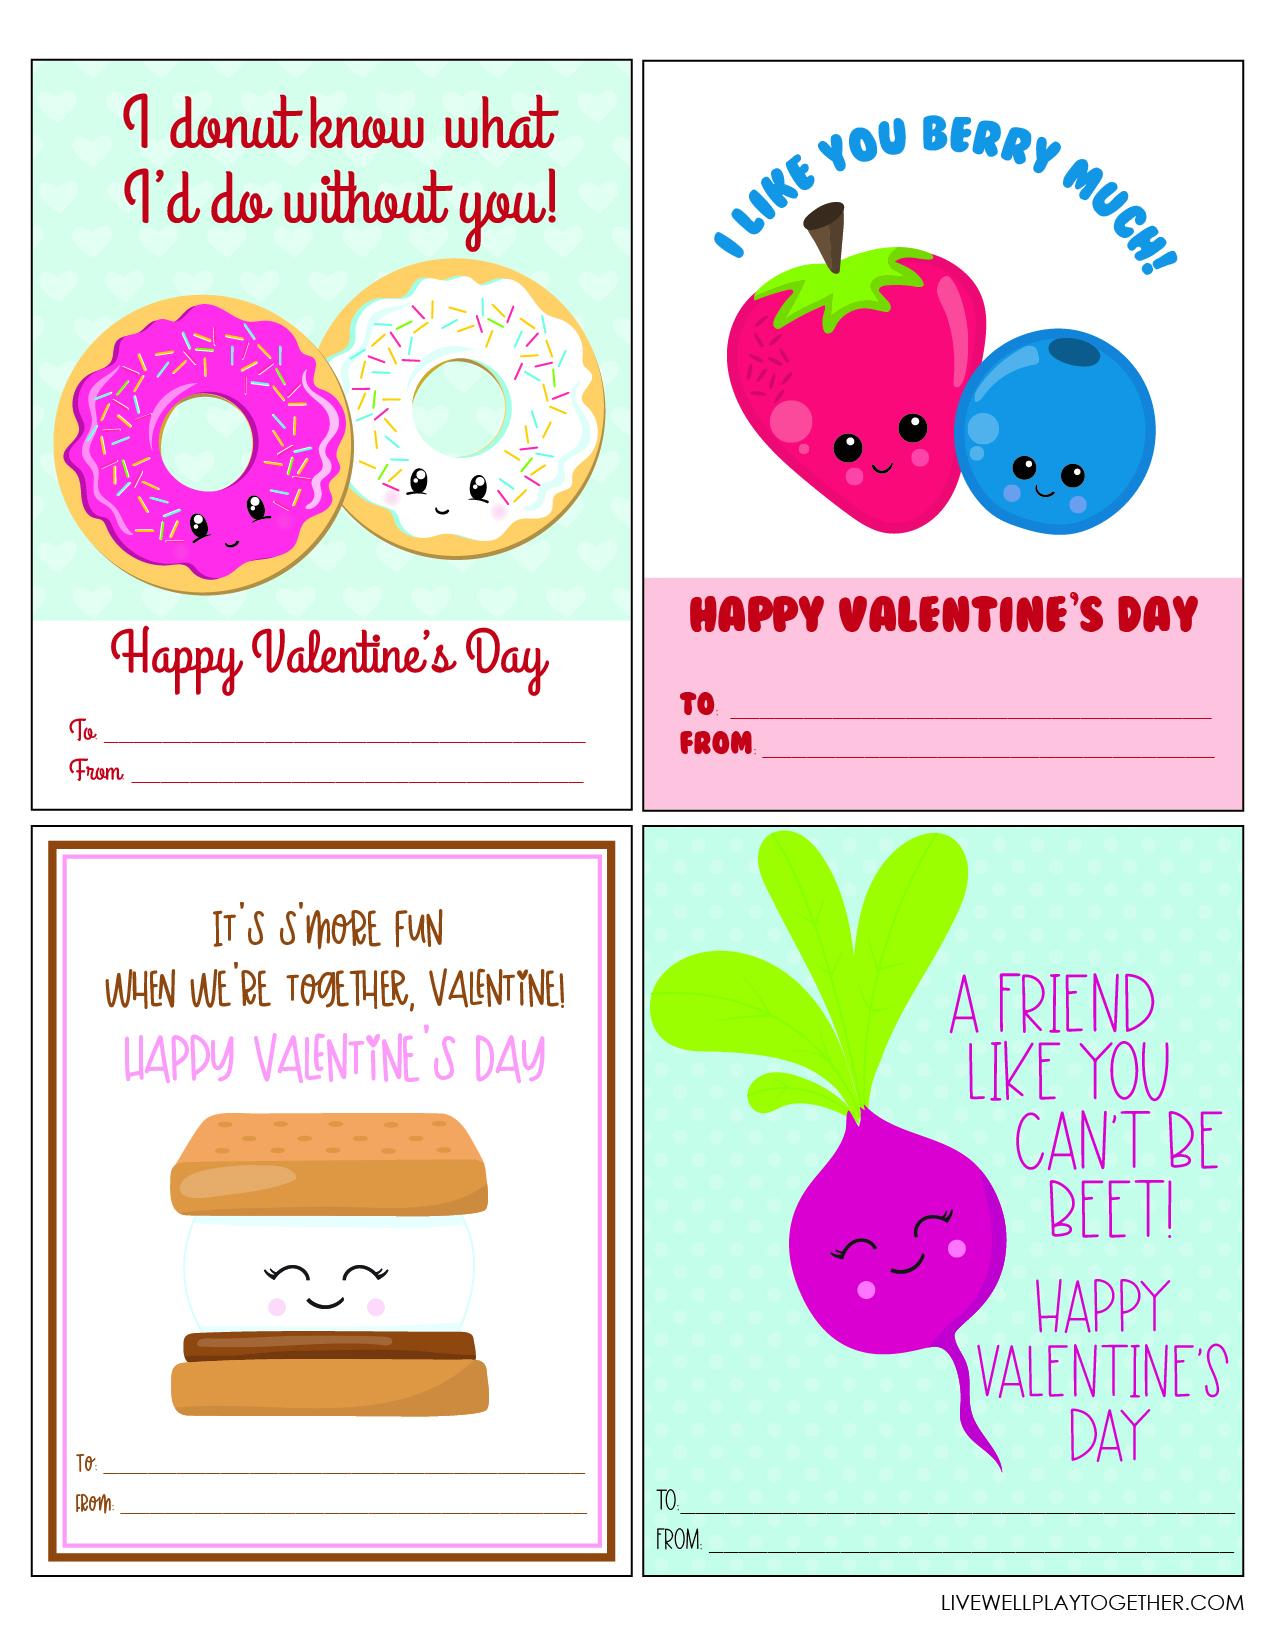 Funny Food Pun Valentine s Day Cards Free Printable Live Well Play